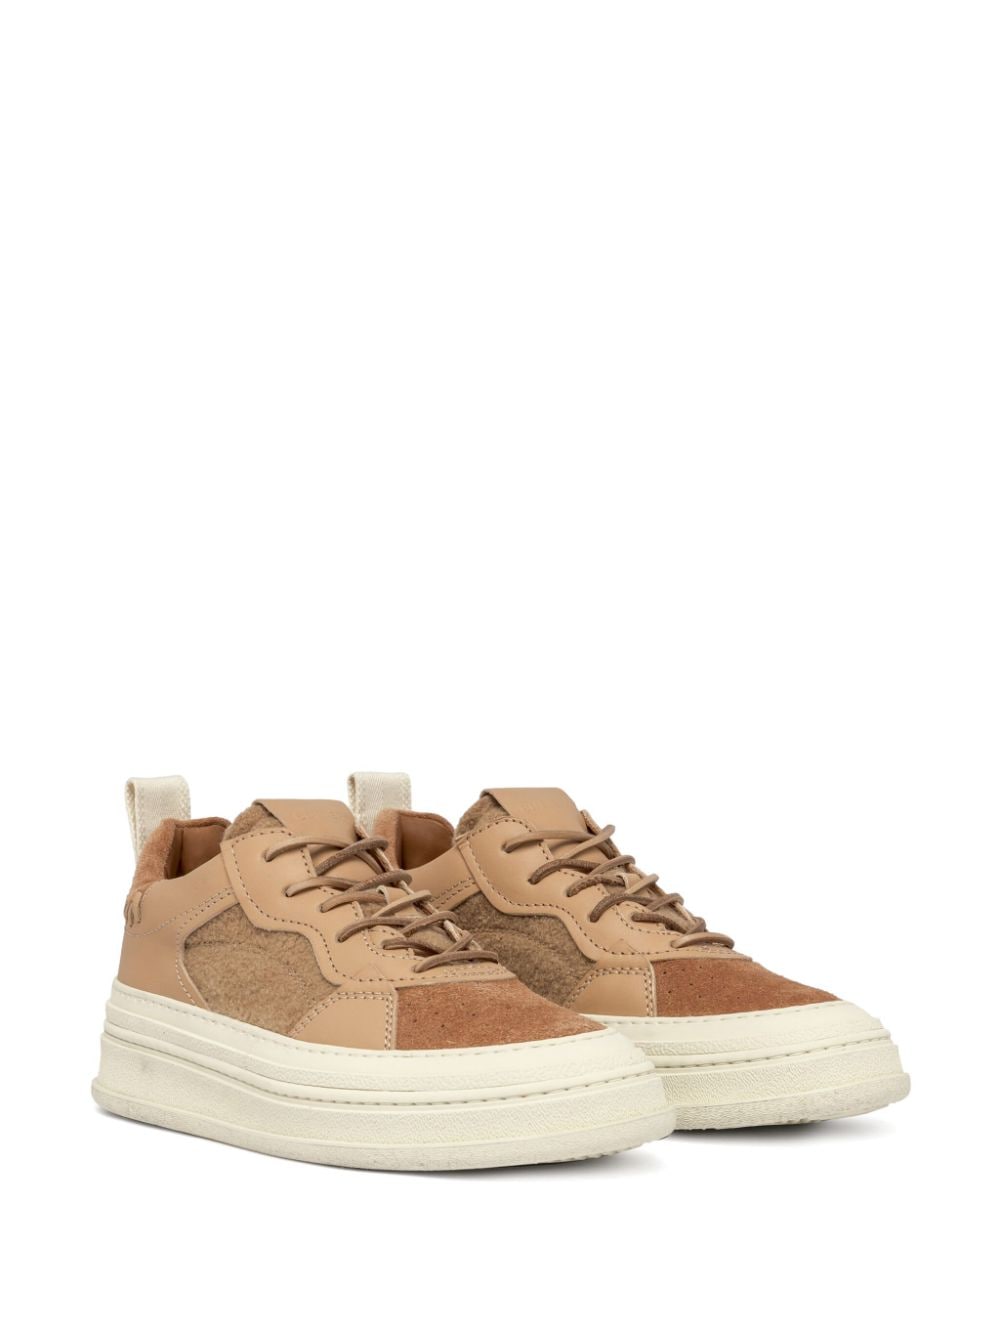 Buttero Circolo panelled sneakers - Beige